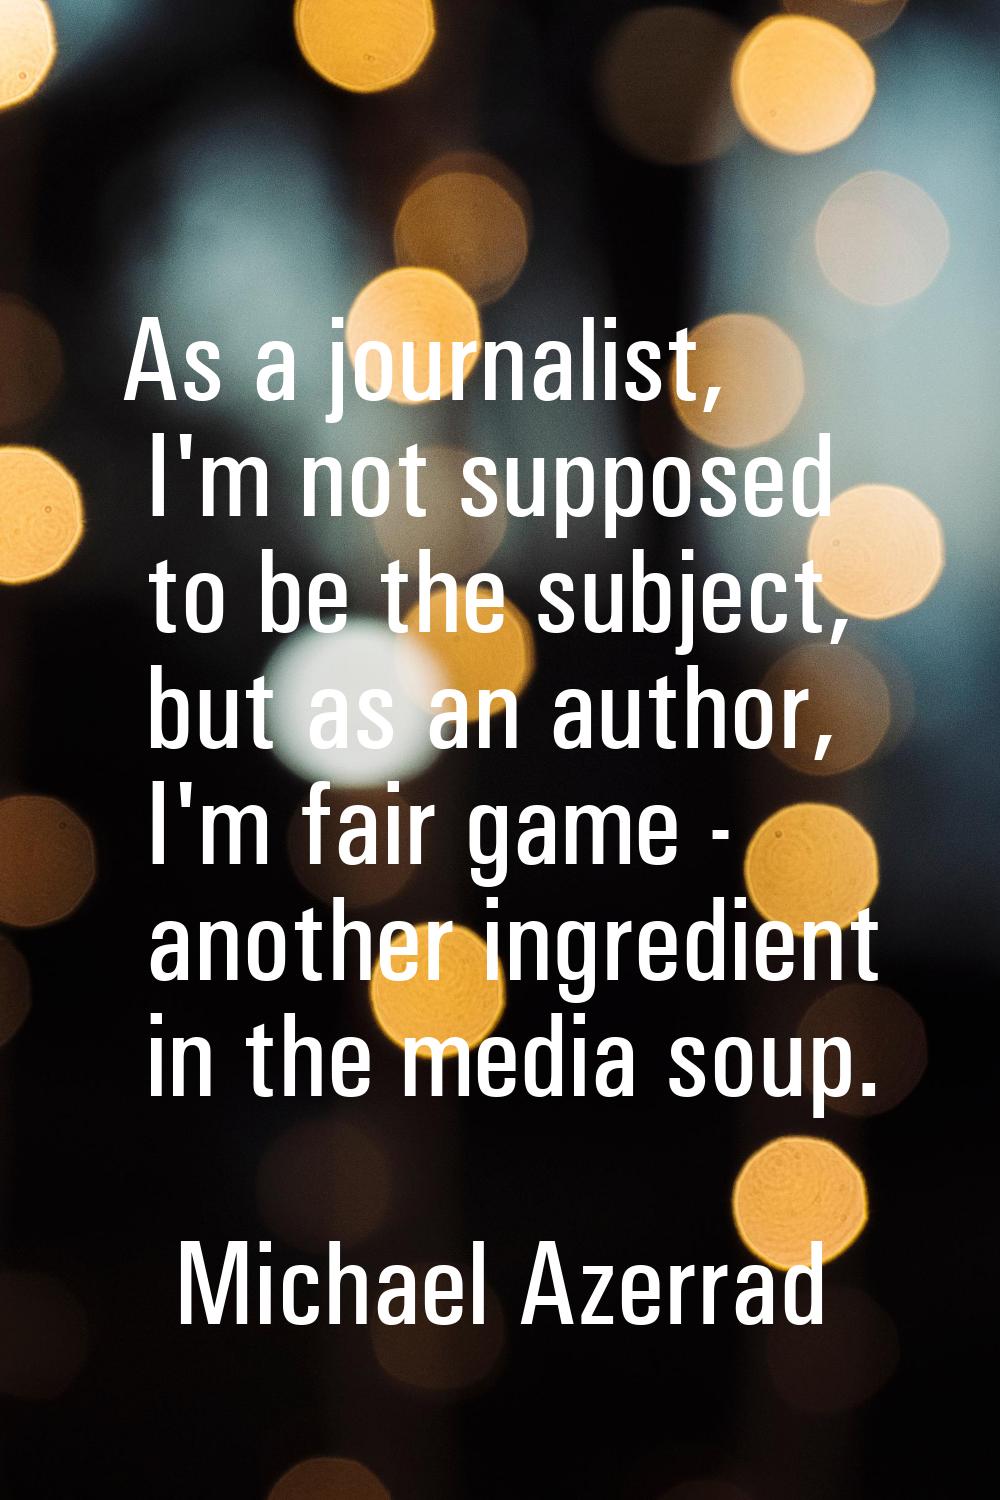 As a journalist, I'm not supposed to be the subject, but as an author, I'm fair game - another ingr